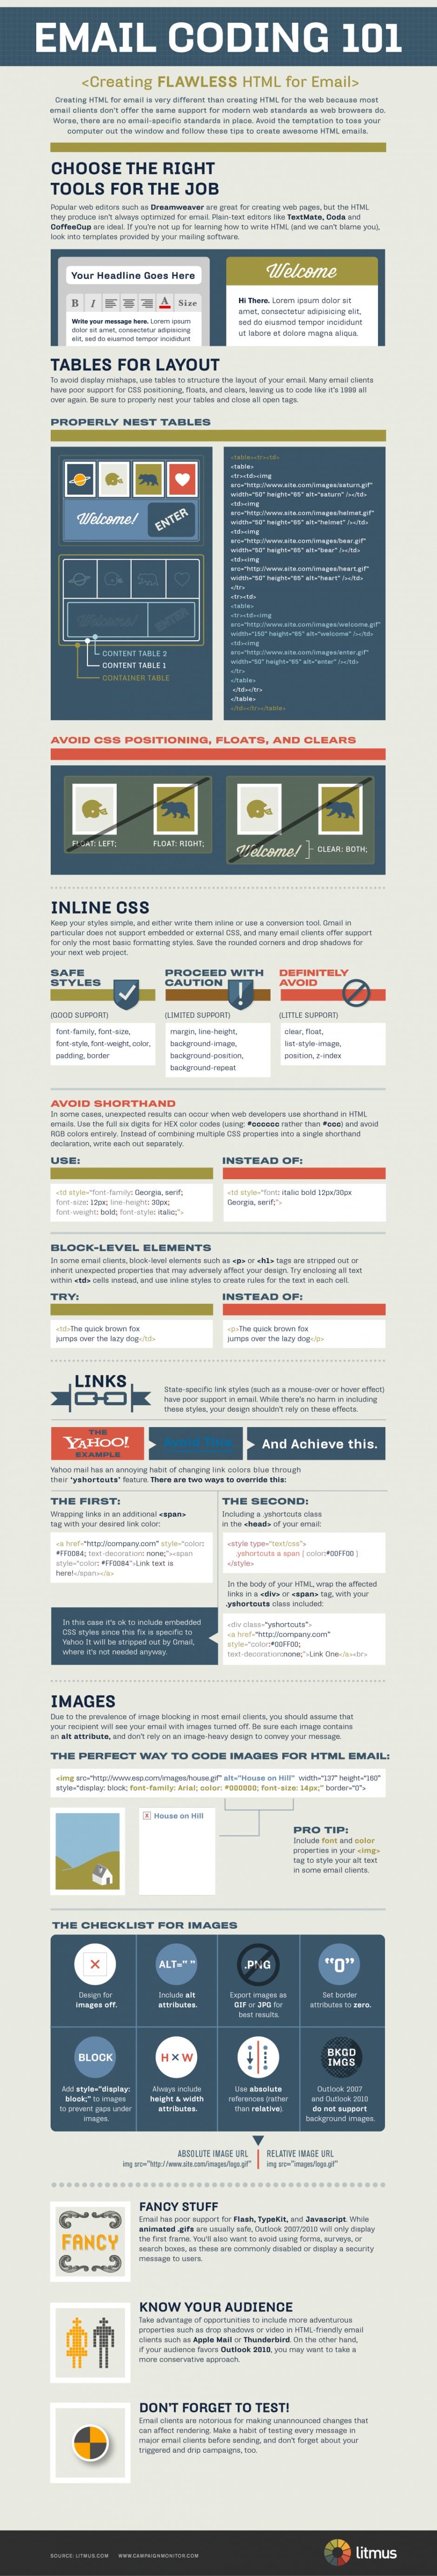 HTML-Email-Code-Infographic